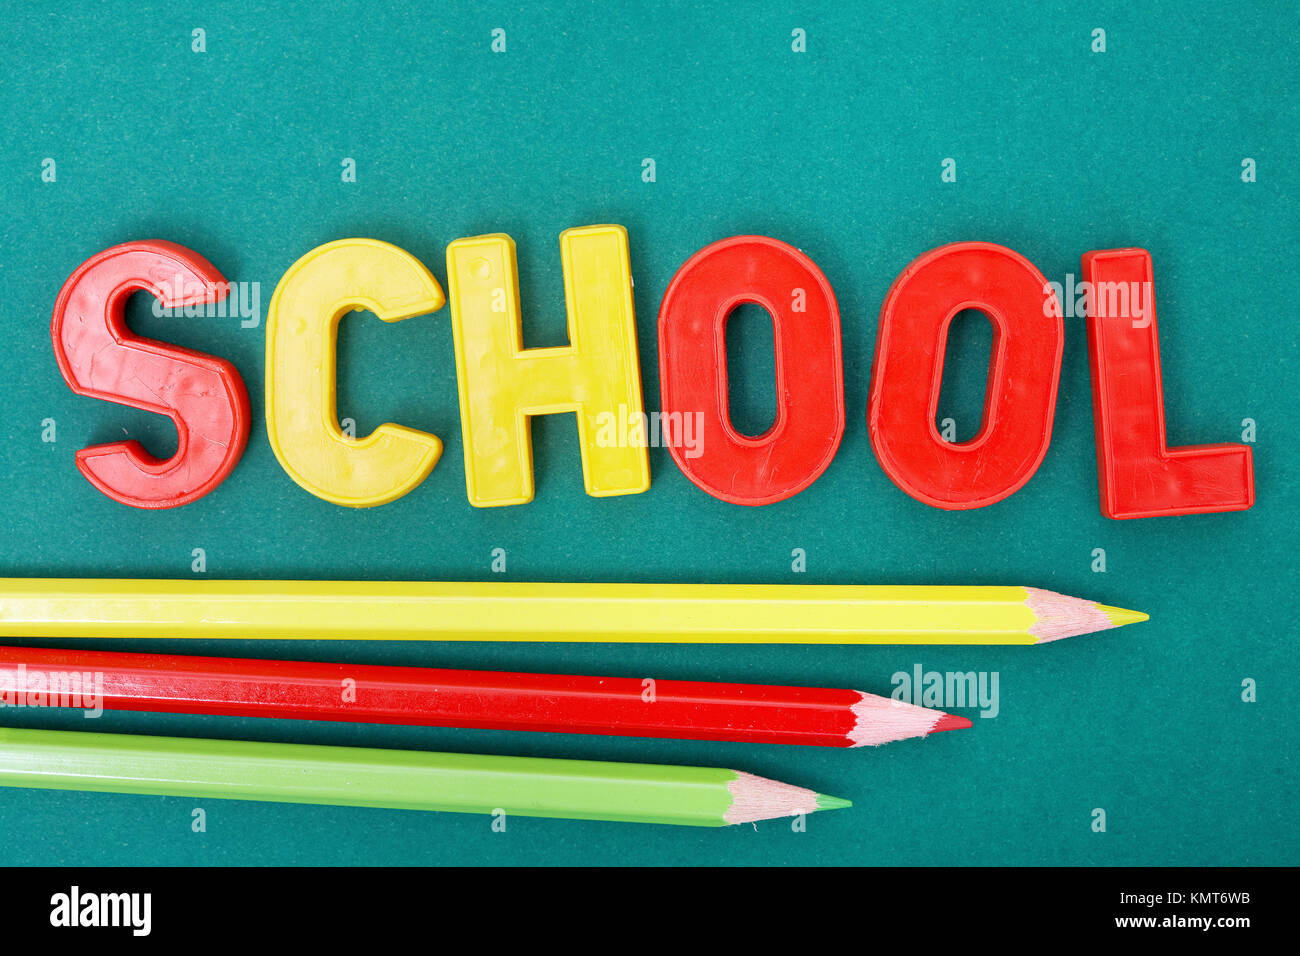 Image of word ‘school’ with three colorful pencils below Stock Photo